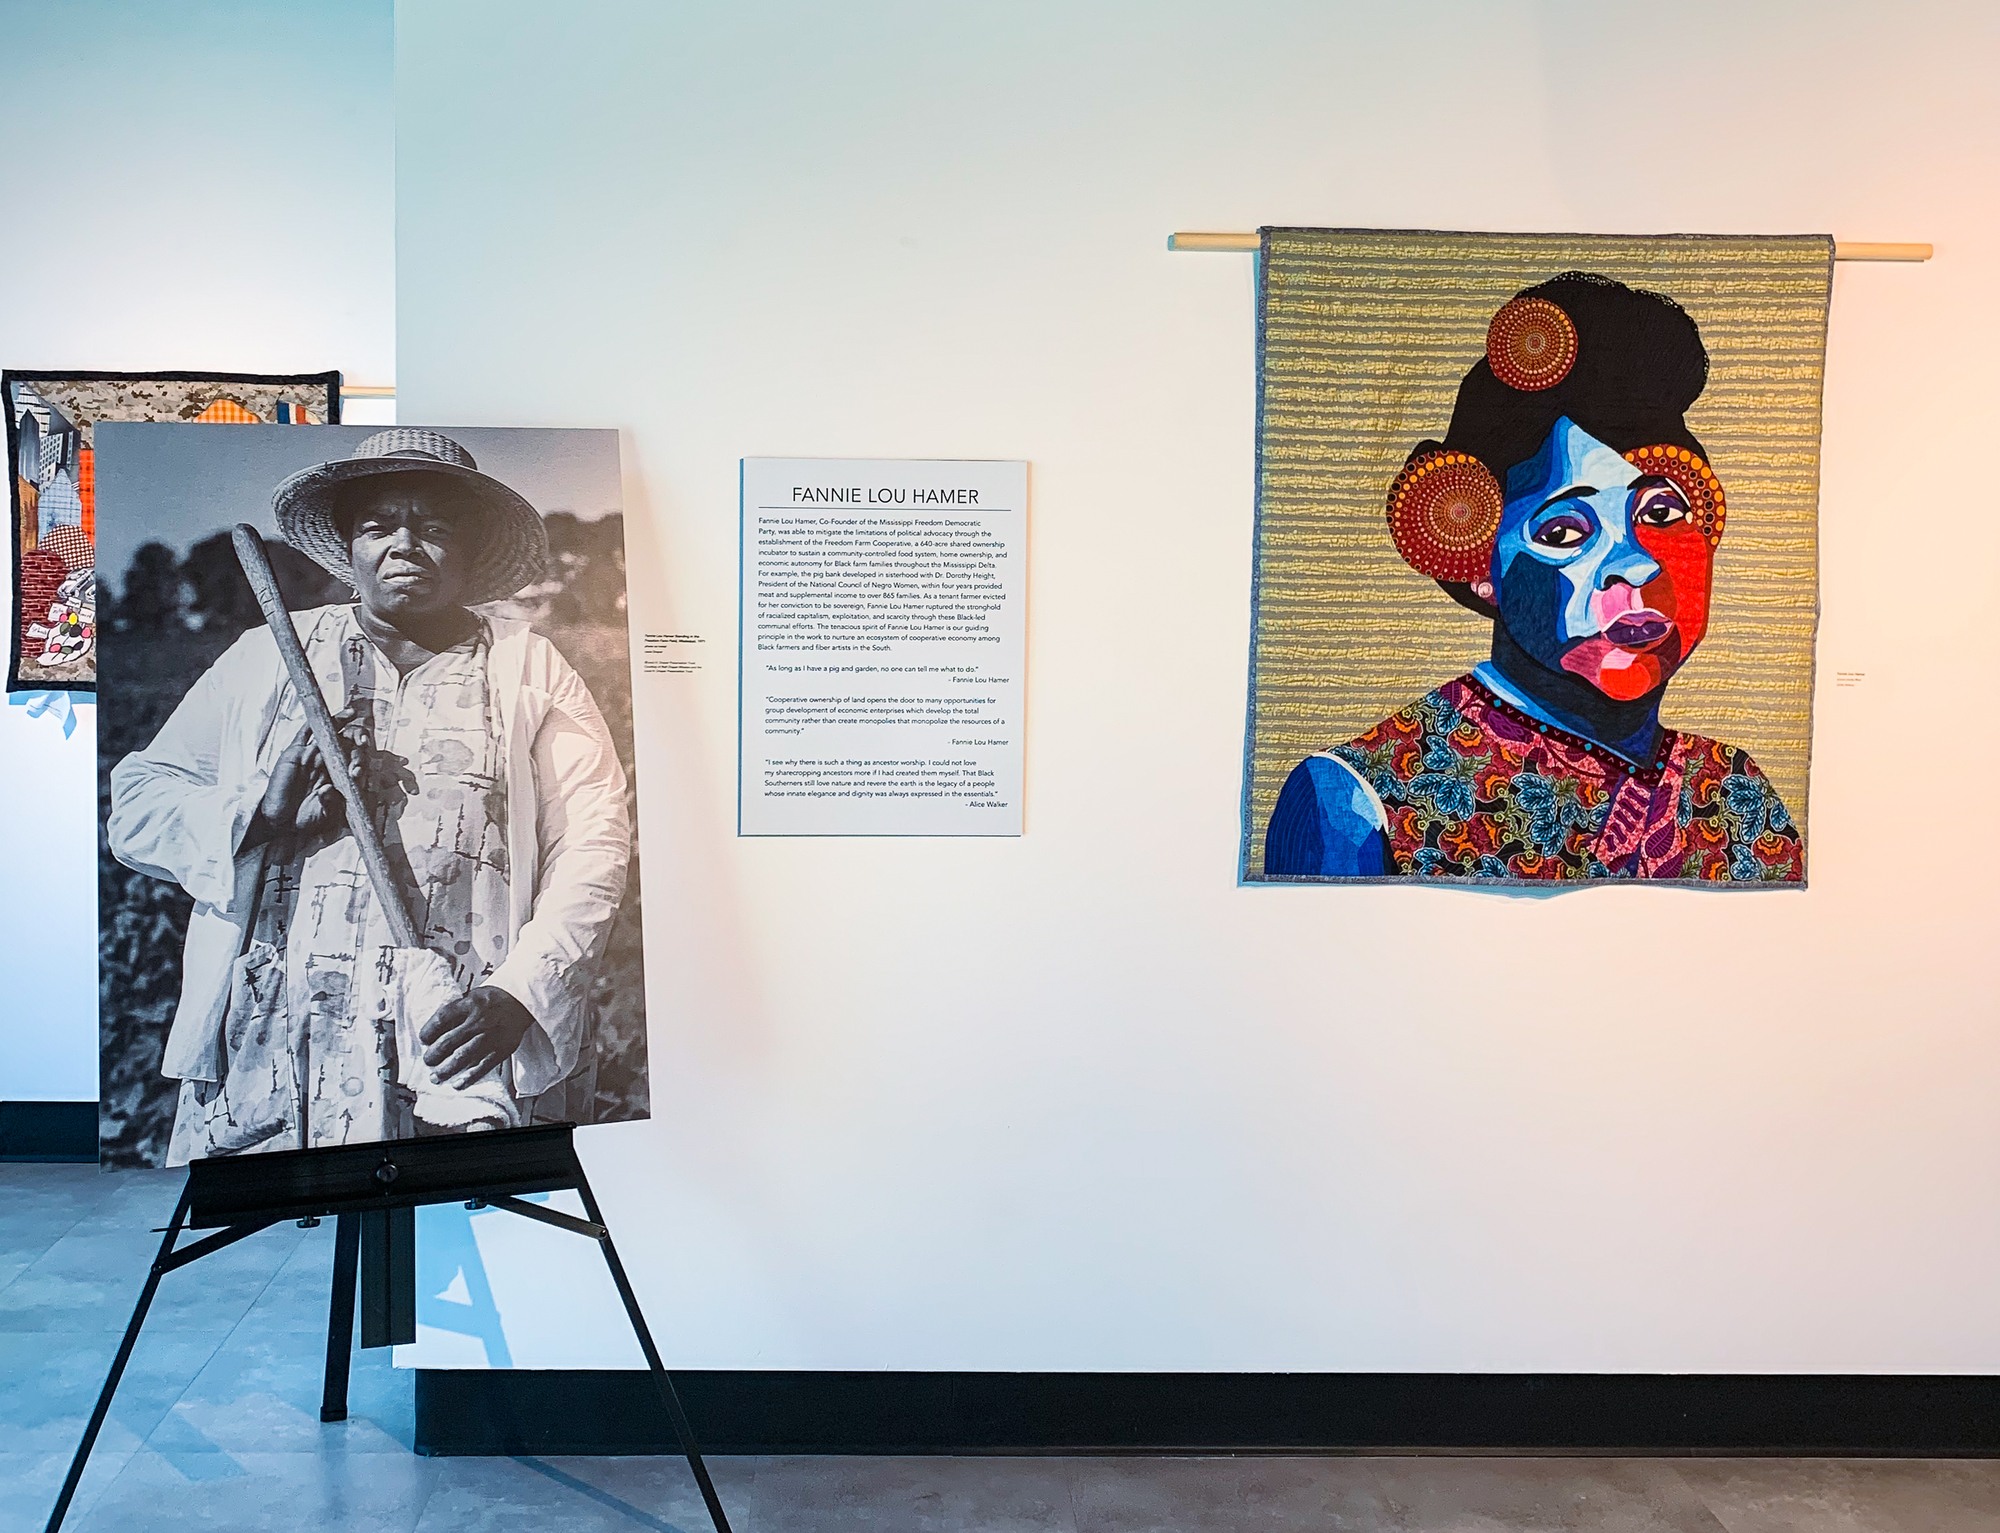 Fannie Lou Hamer quilted portrait and photo portrait in Charleston's City Gallery. Feb. 2022